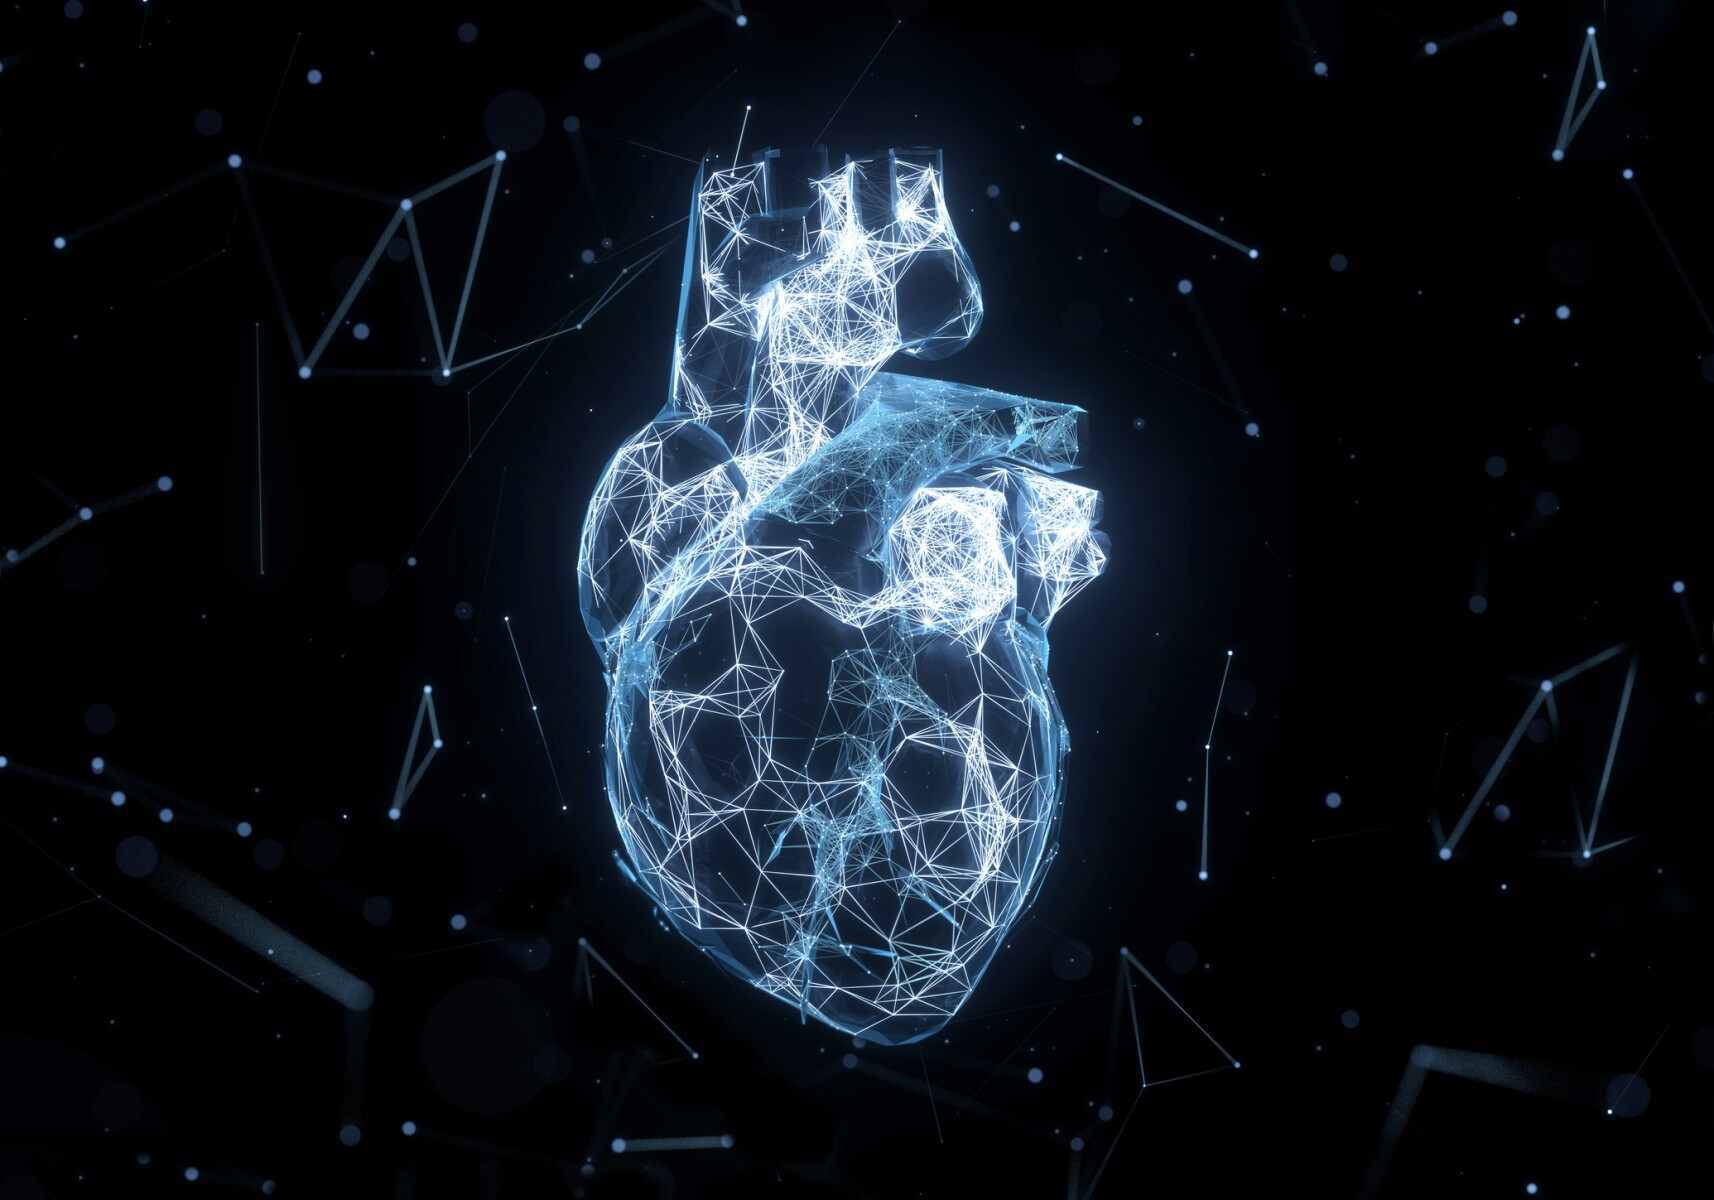 A new Smidt Heart Institute study published in Nature showed  that artificial intelligence was expert in assessing and diagnosing cardiac function by analyzing echocardiogram images. Image by Getty.